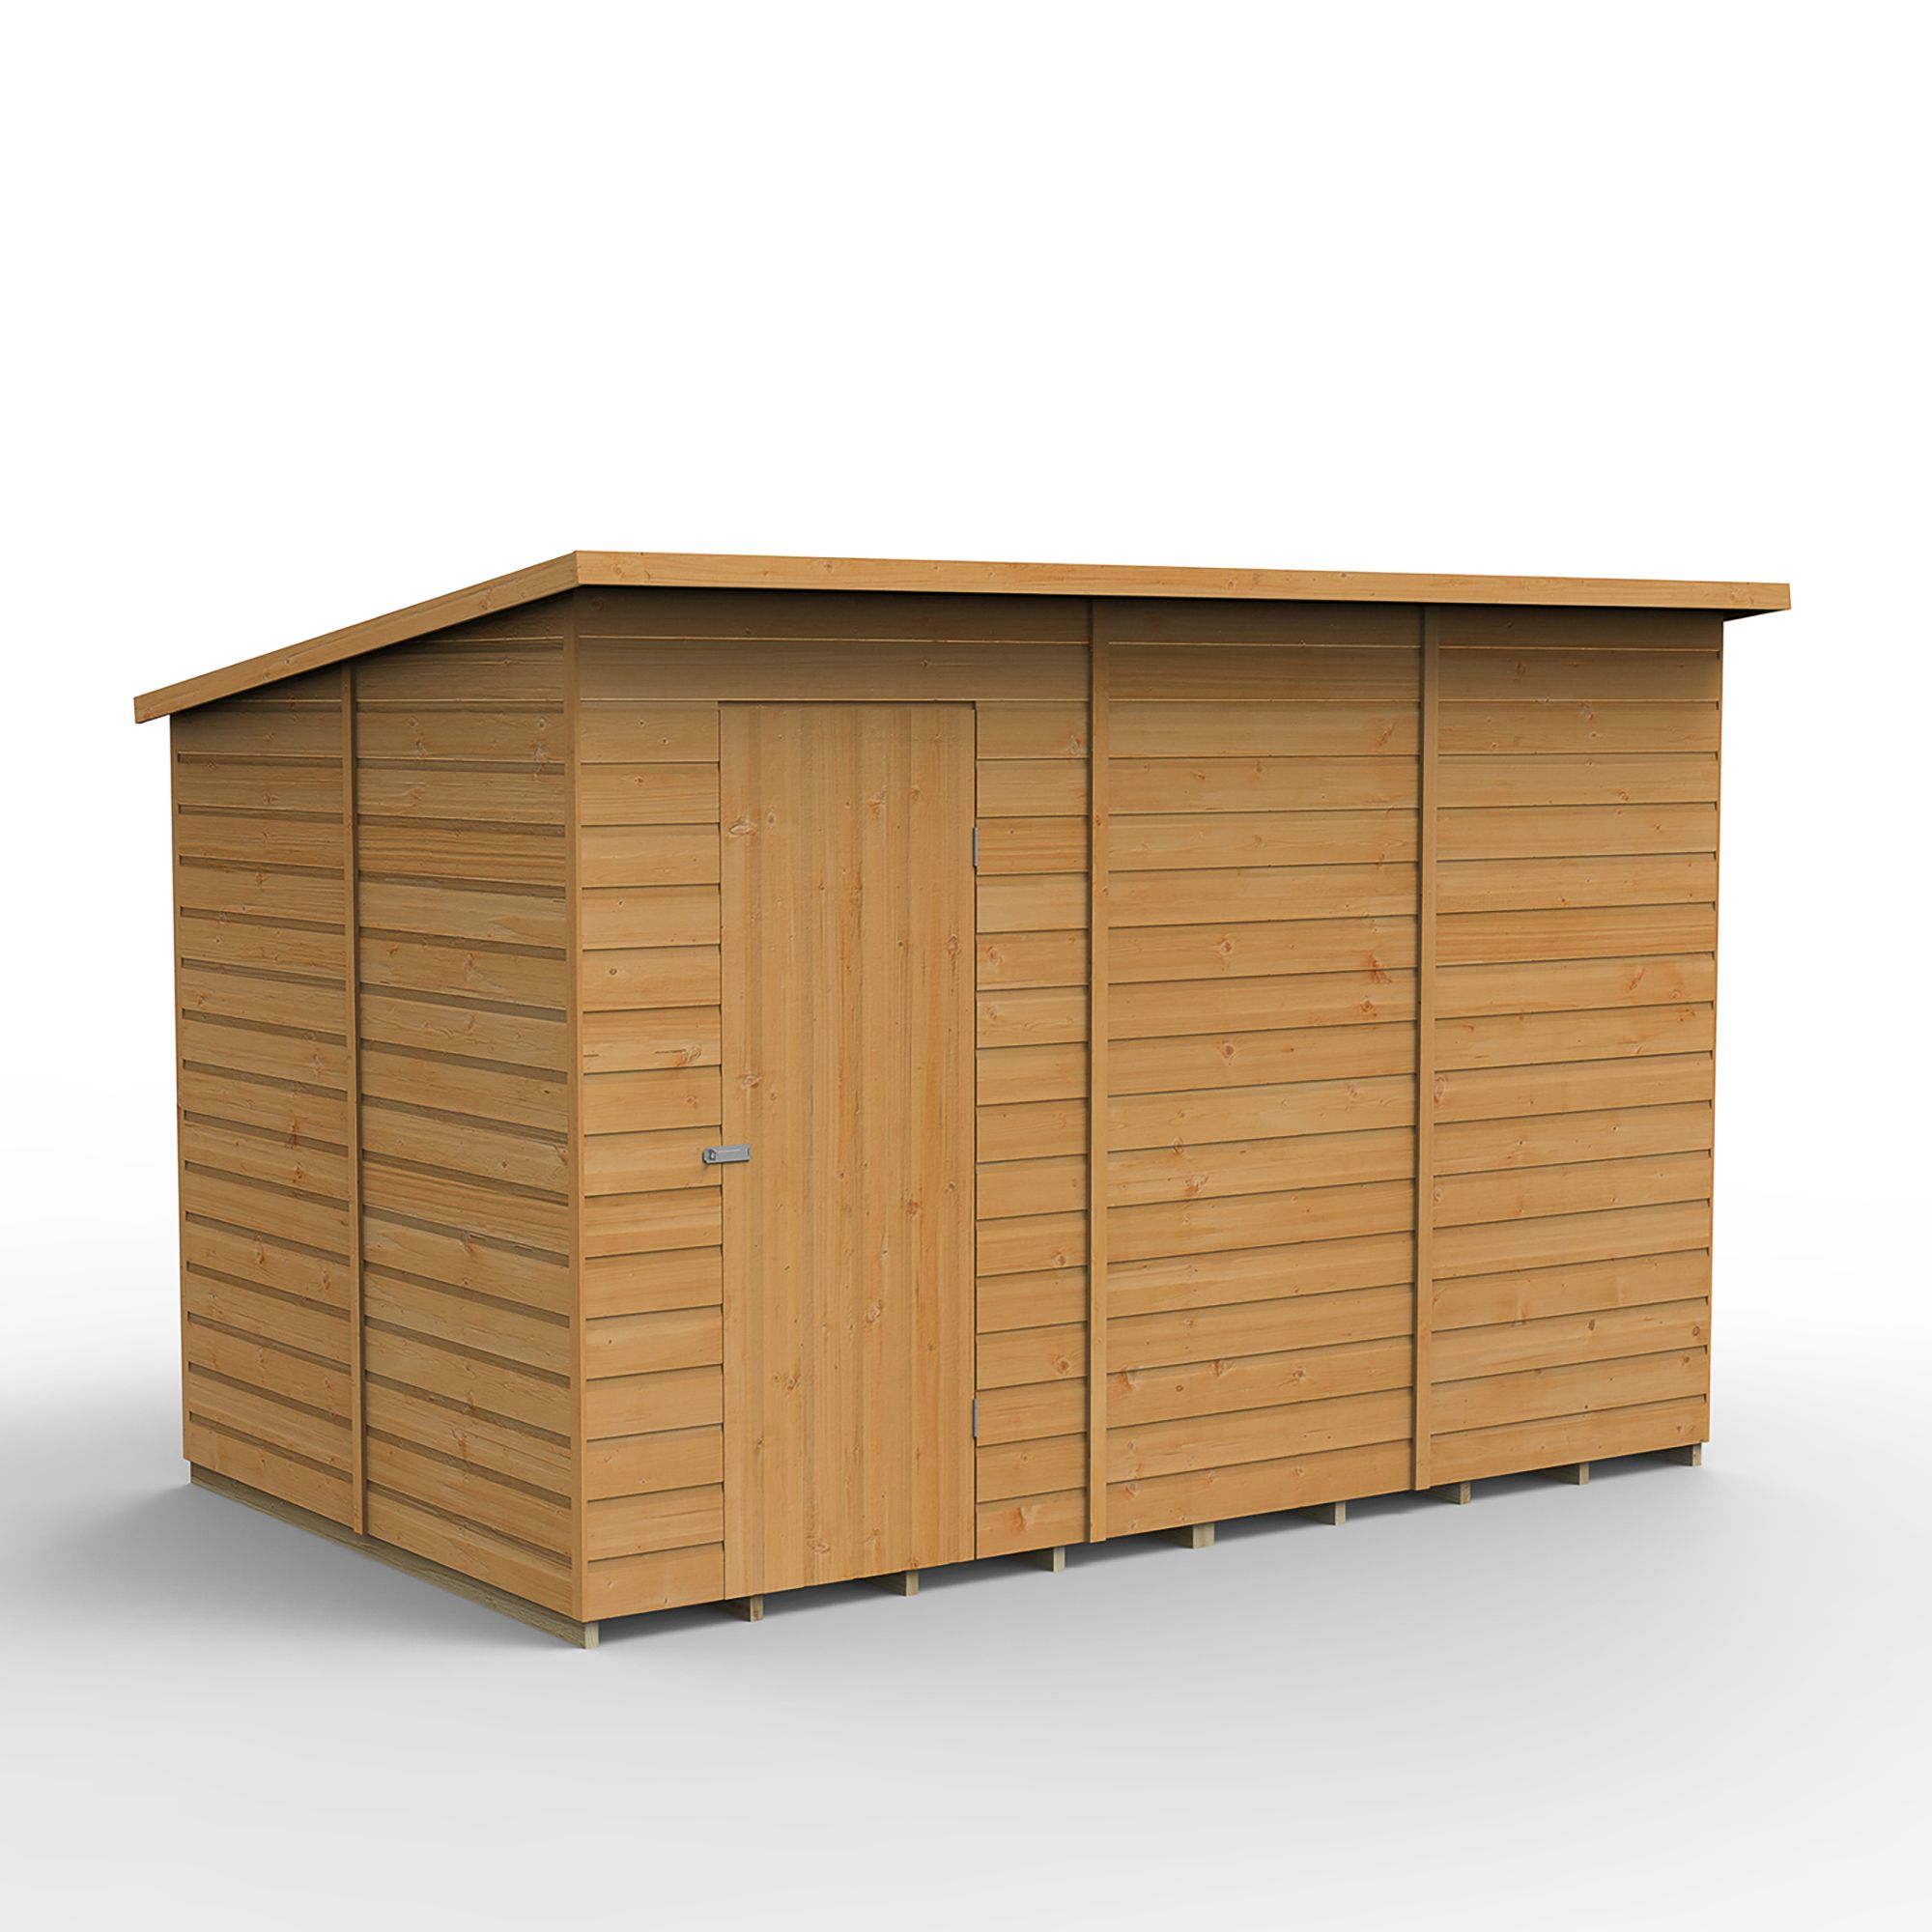 Forest Garden Shiplap 10x6 ft Pent Wooden Shed with floor - Assembly service included